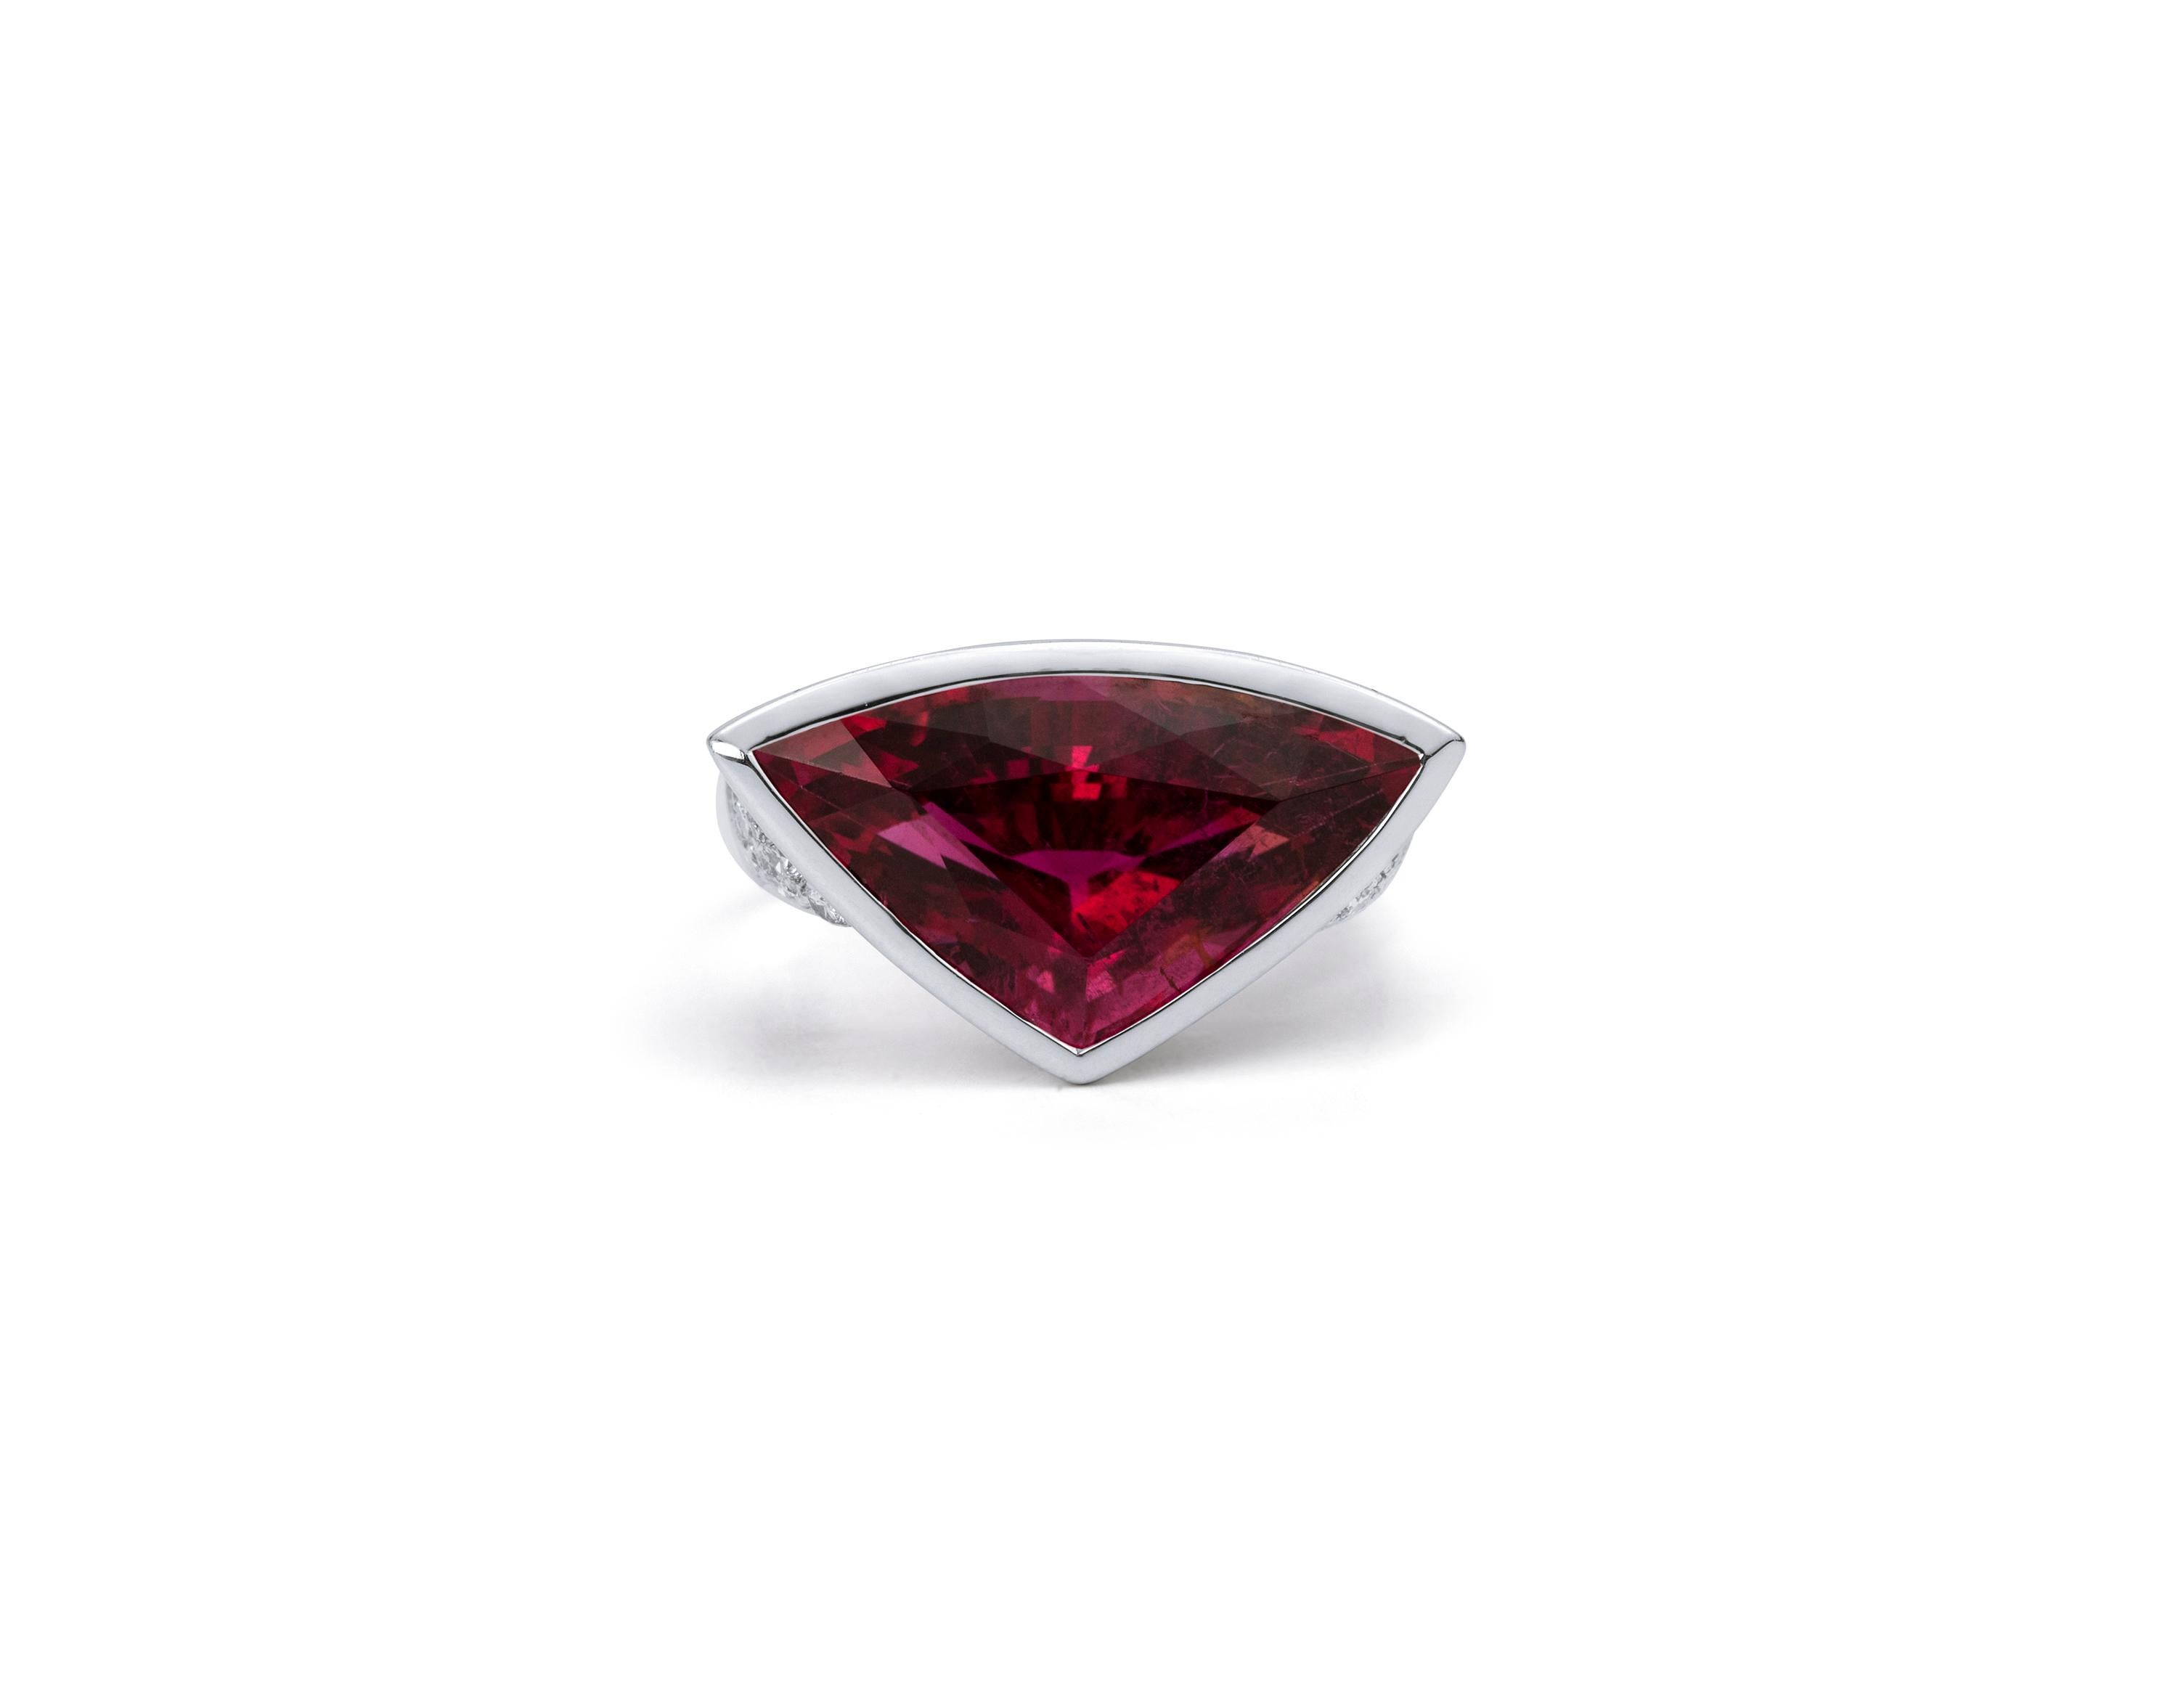 3.27 carat Trillion Cut Rubellite Tourmaline 0.83 Diamonds Cocktail Ring 18k 

Available in 18k Yellow gold.

Same design can be made also with other custom gemstones per request.

Product details:

- Solid gold 5 grams

- Side diamond - approx. 0.8